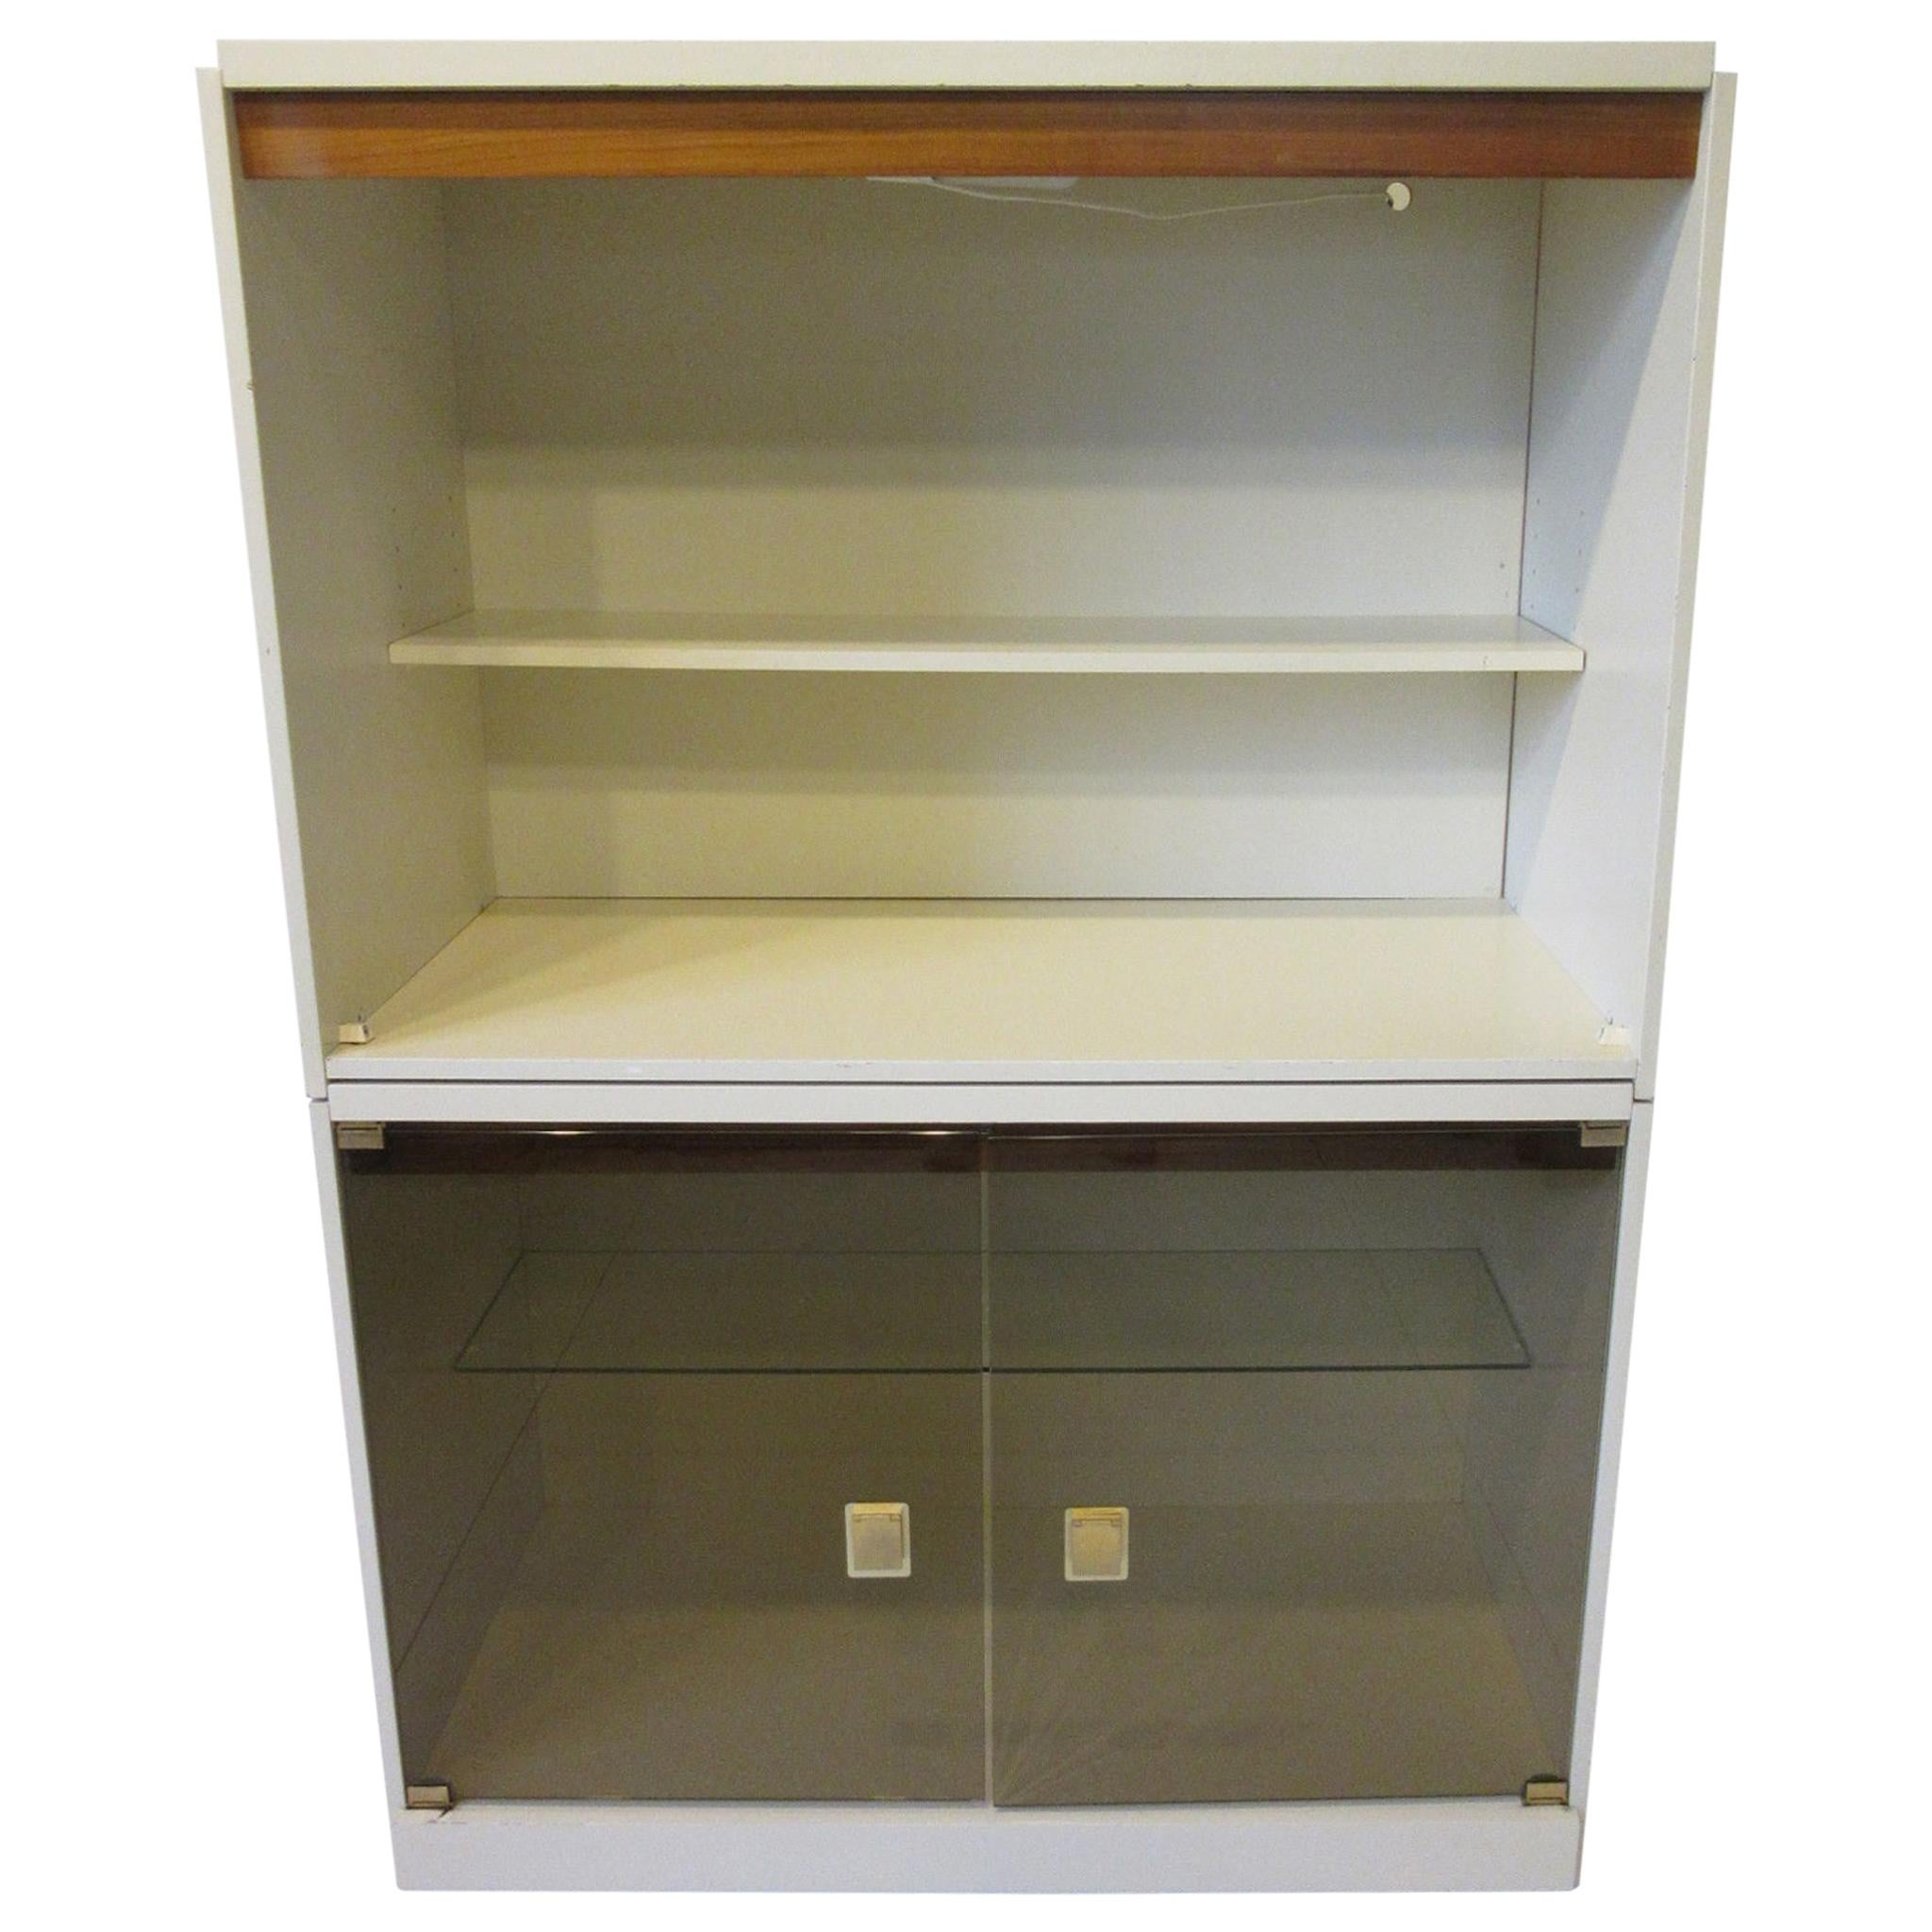 1970s Cabinet or Bookcase with Glass Doors